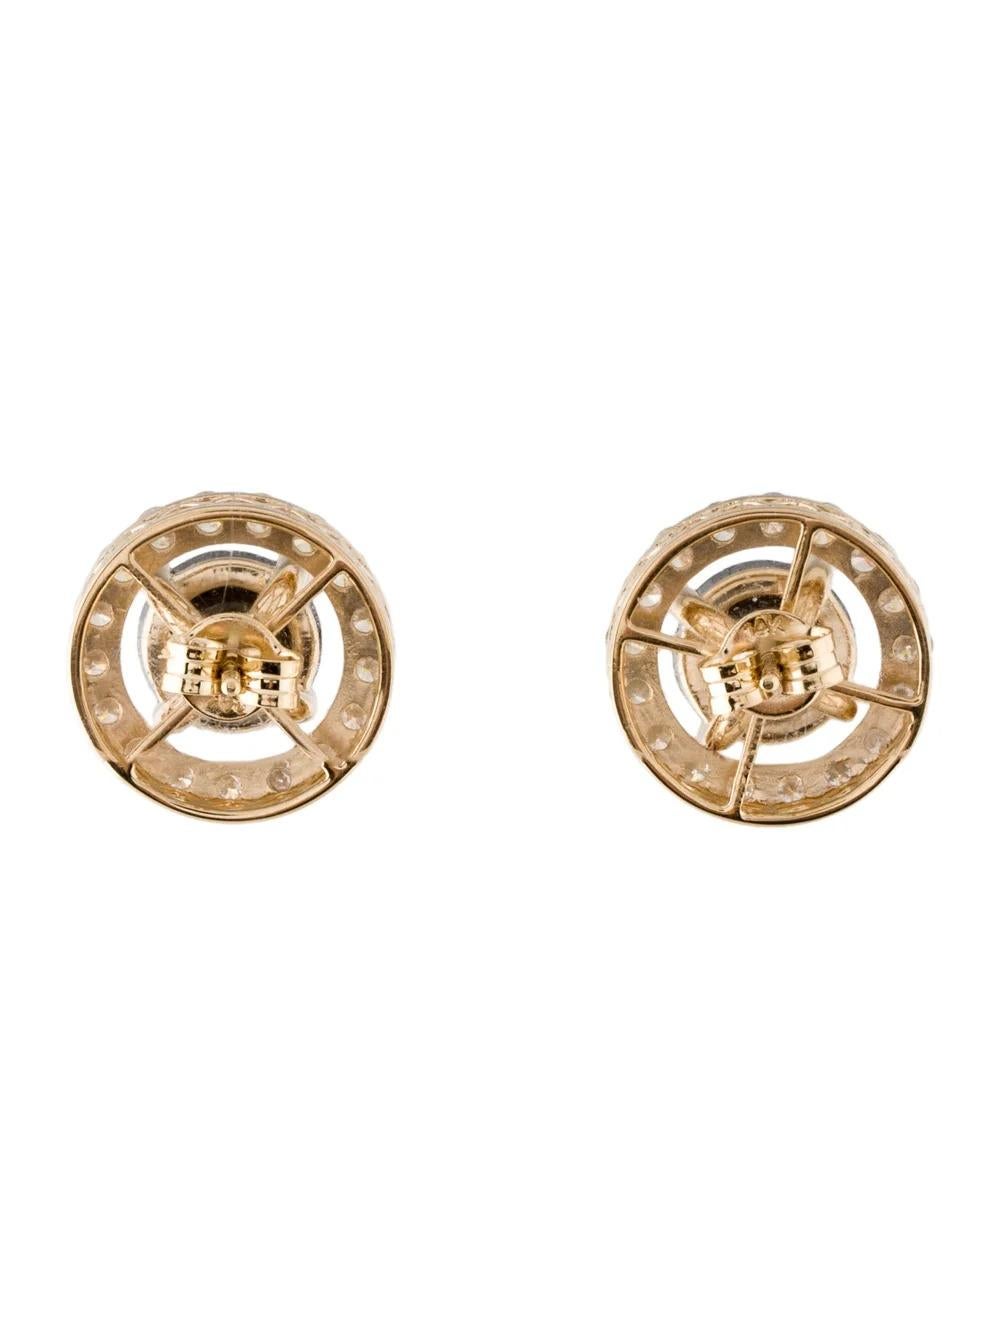 14K Diamond & Jacket Stud Earrings: Timeless Sparkle, Elegant Statement Jewelry In New Condition For Sale In Holtsville, NY